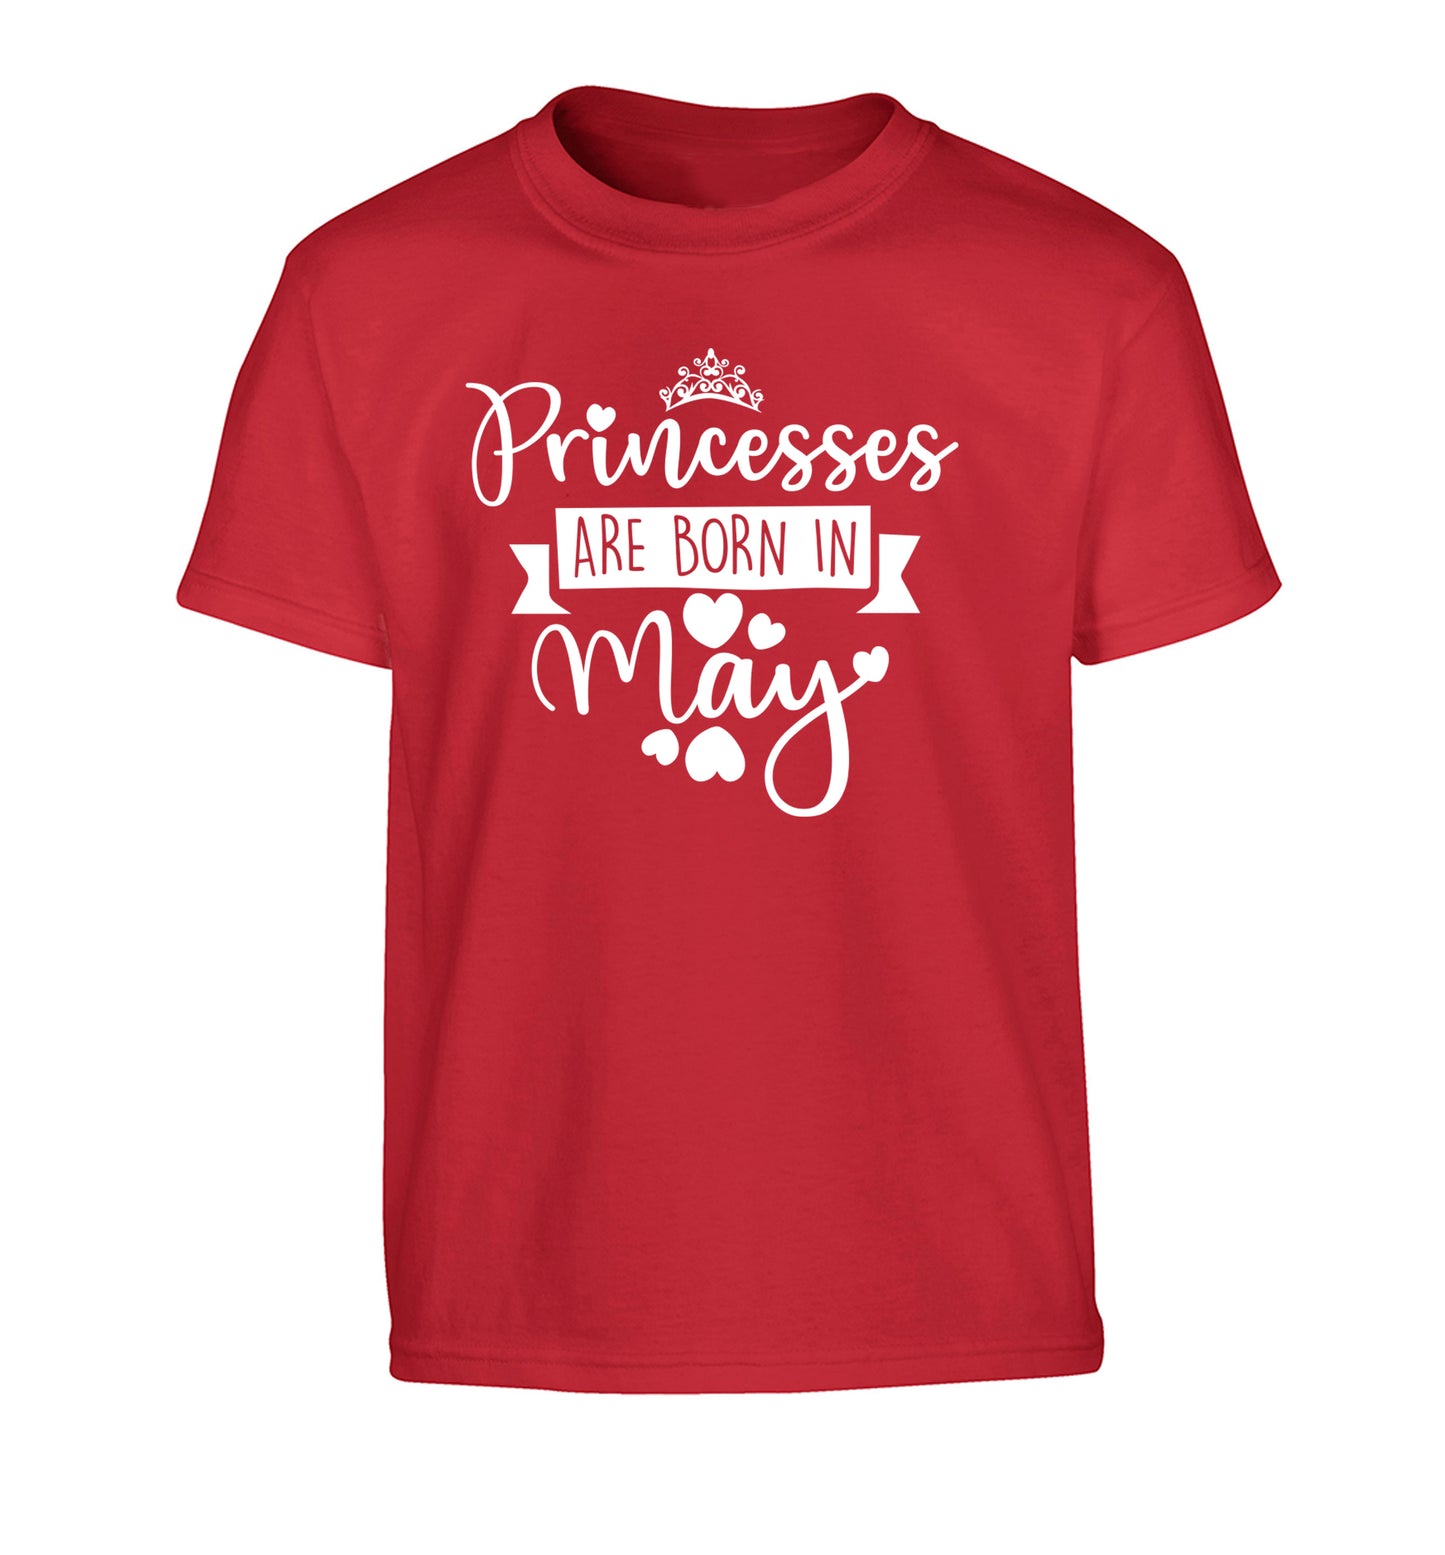 Princesses are born in May Children's red Tshirt 12-13 Years